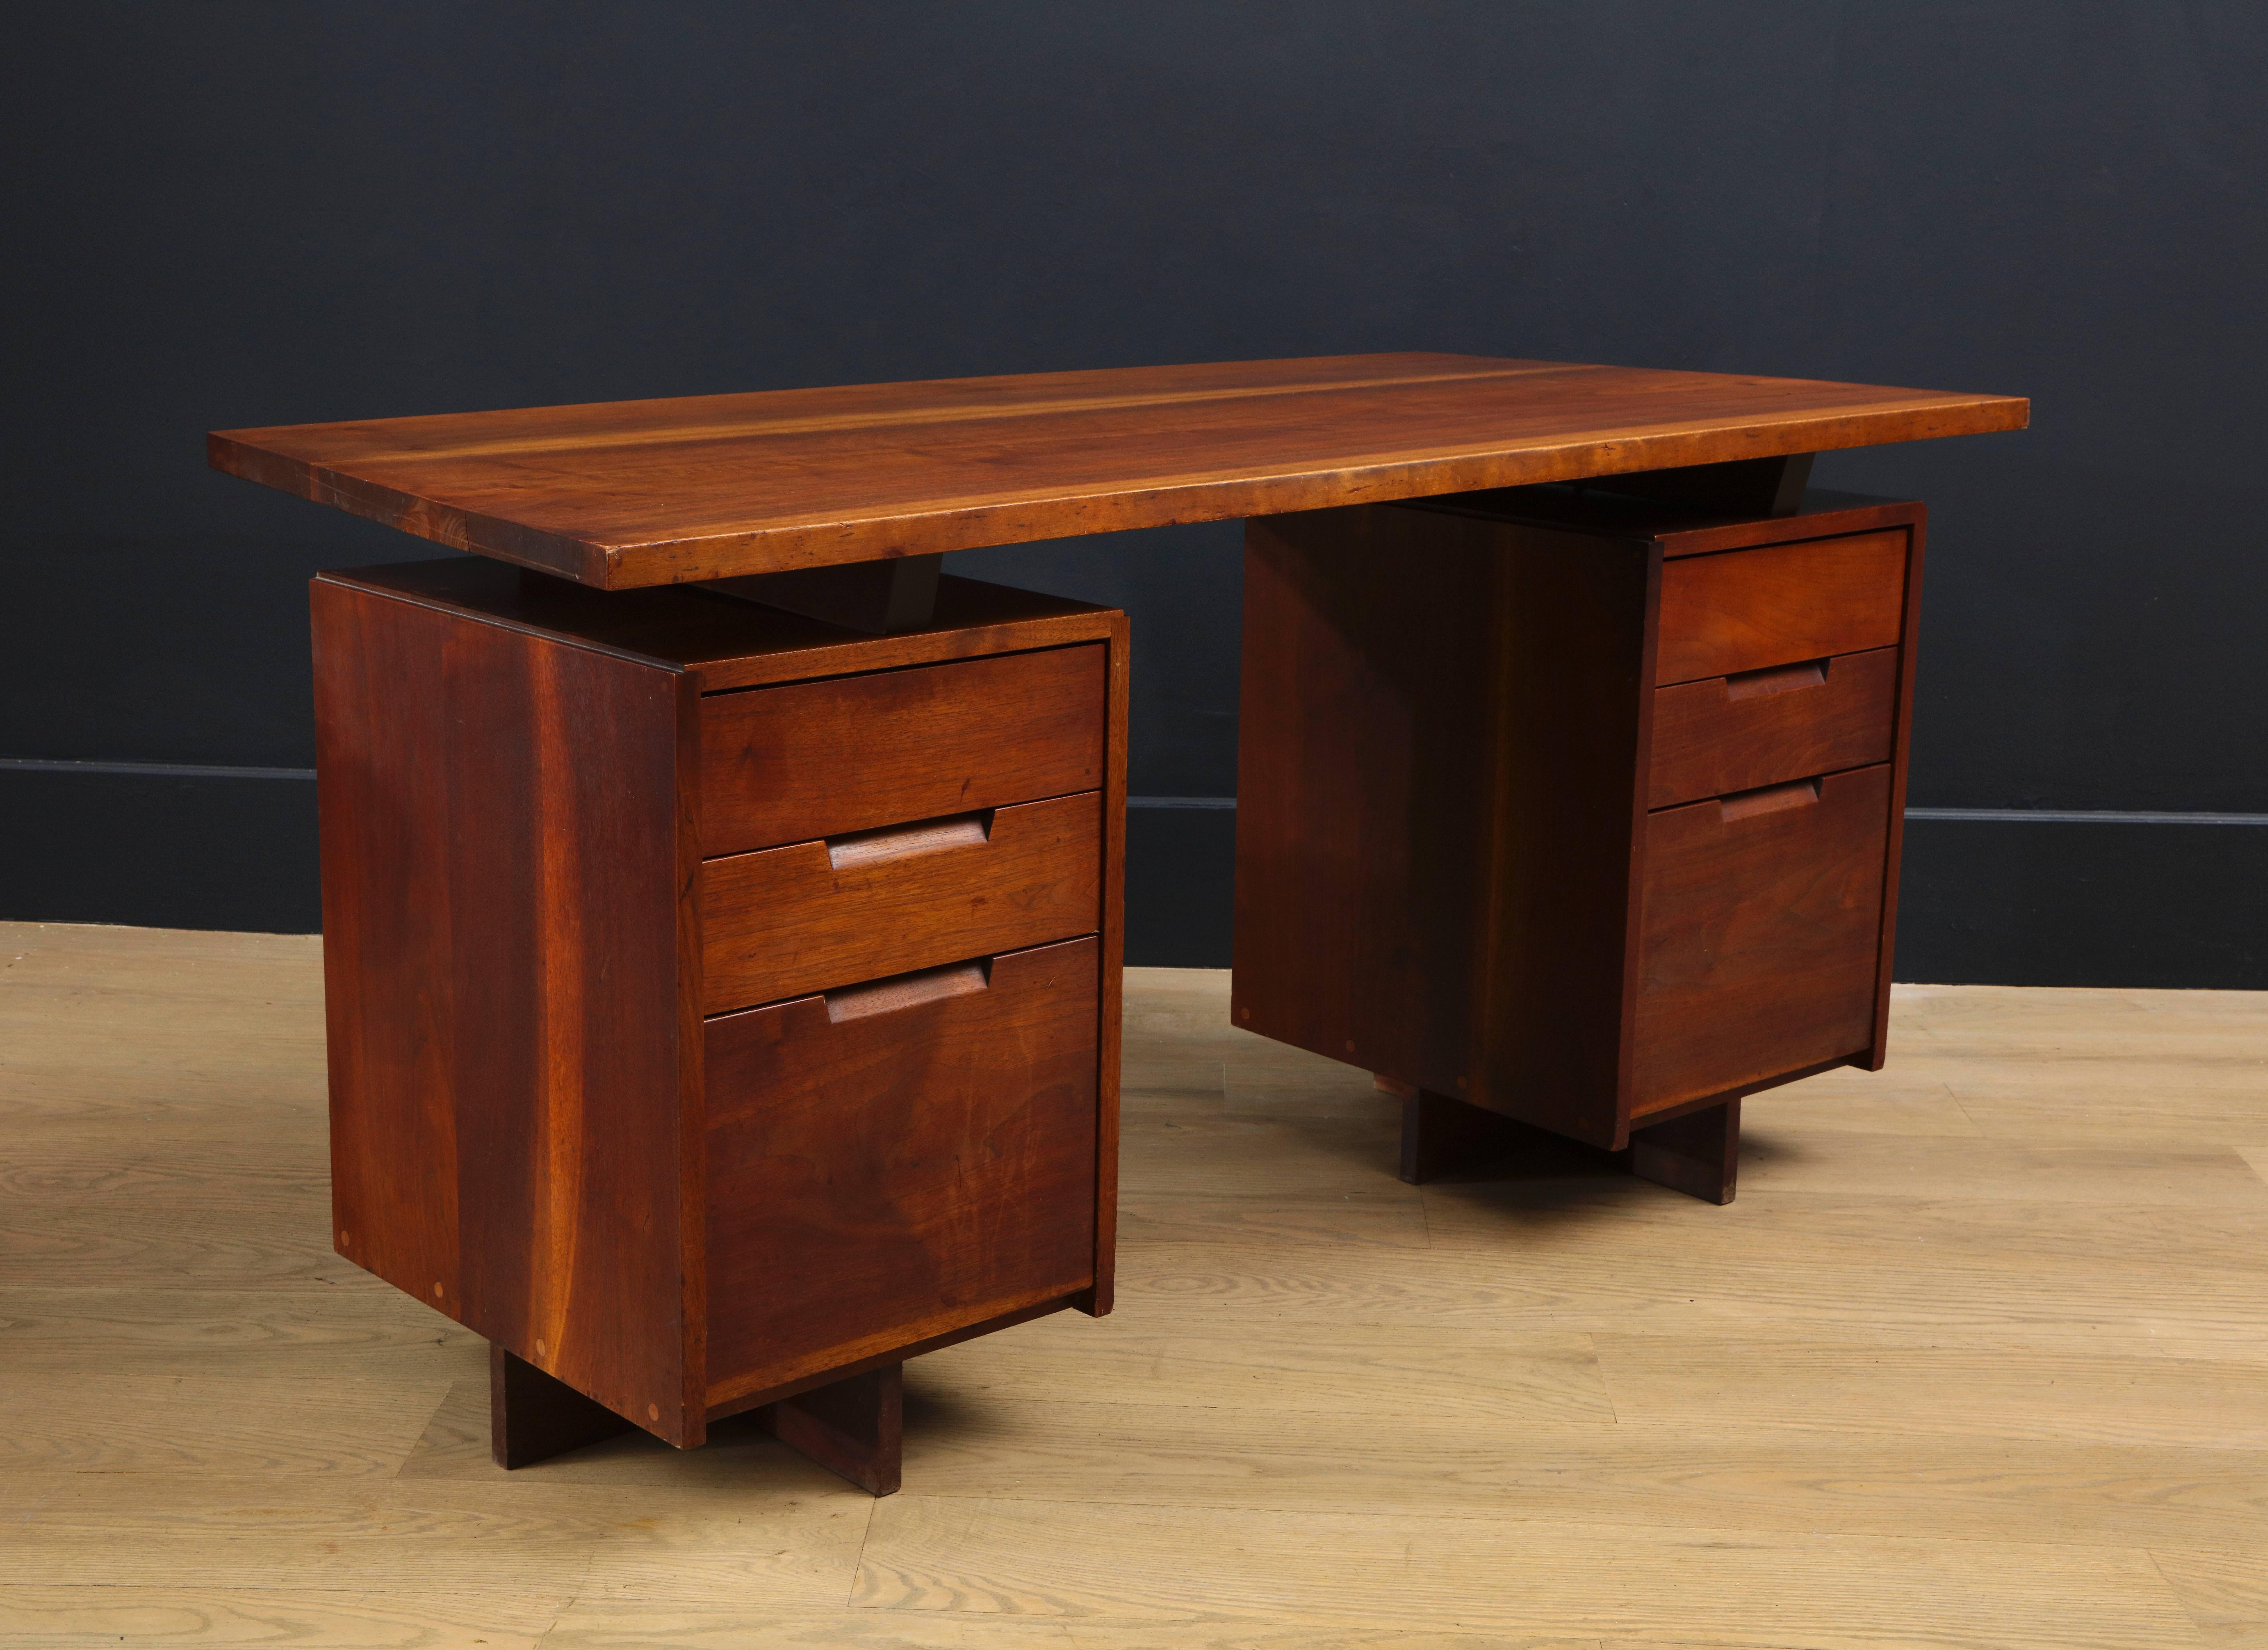 American Studio Movement desk by George Nakashima in black walnut. Double pedestal supports with three drawers with a curving and tapered top. With one previous owner who acquired this desk directly from Nakashima.